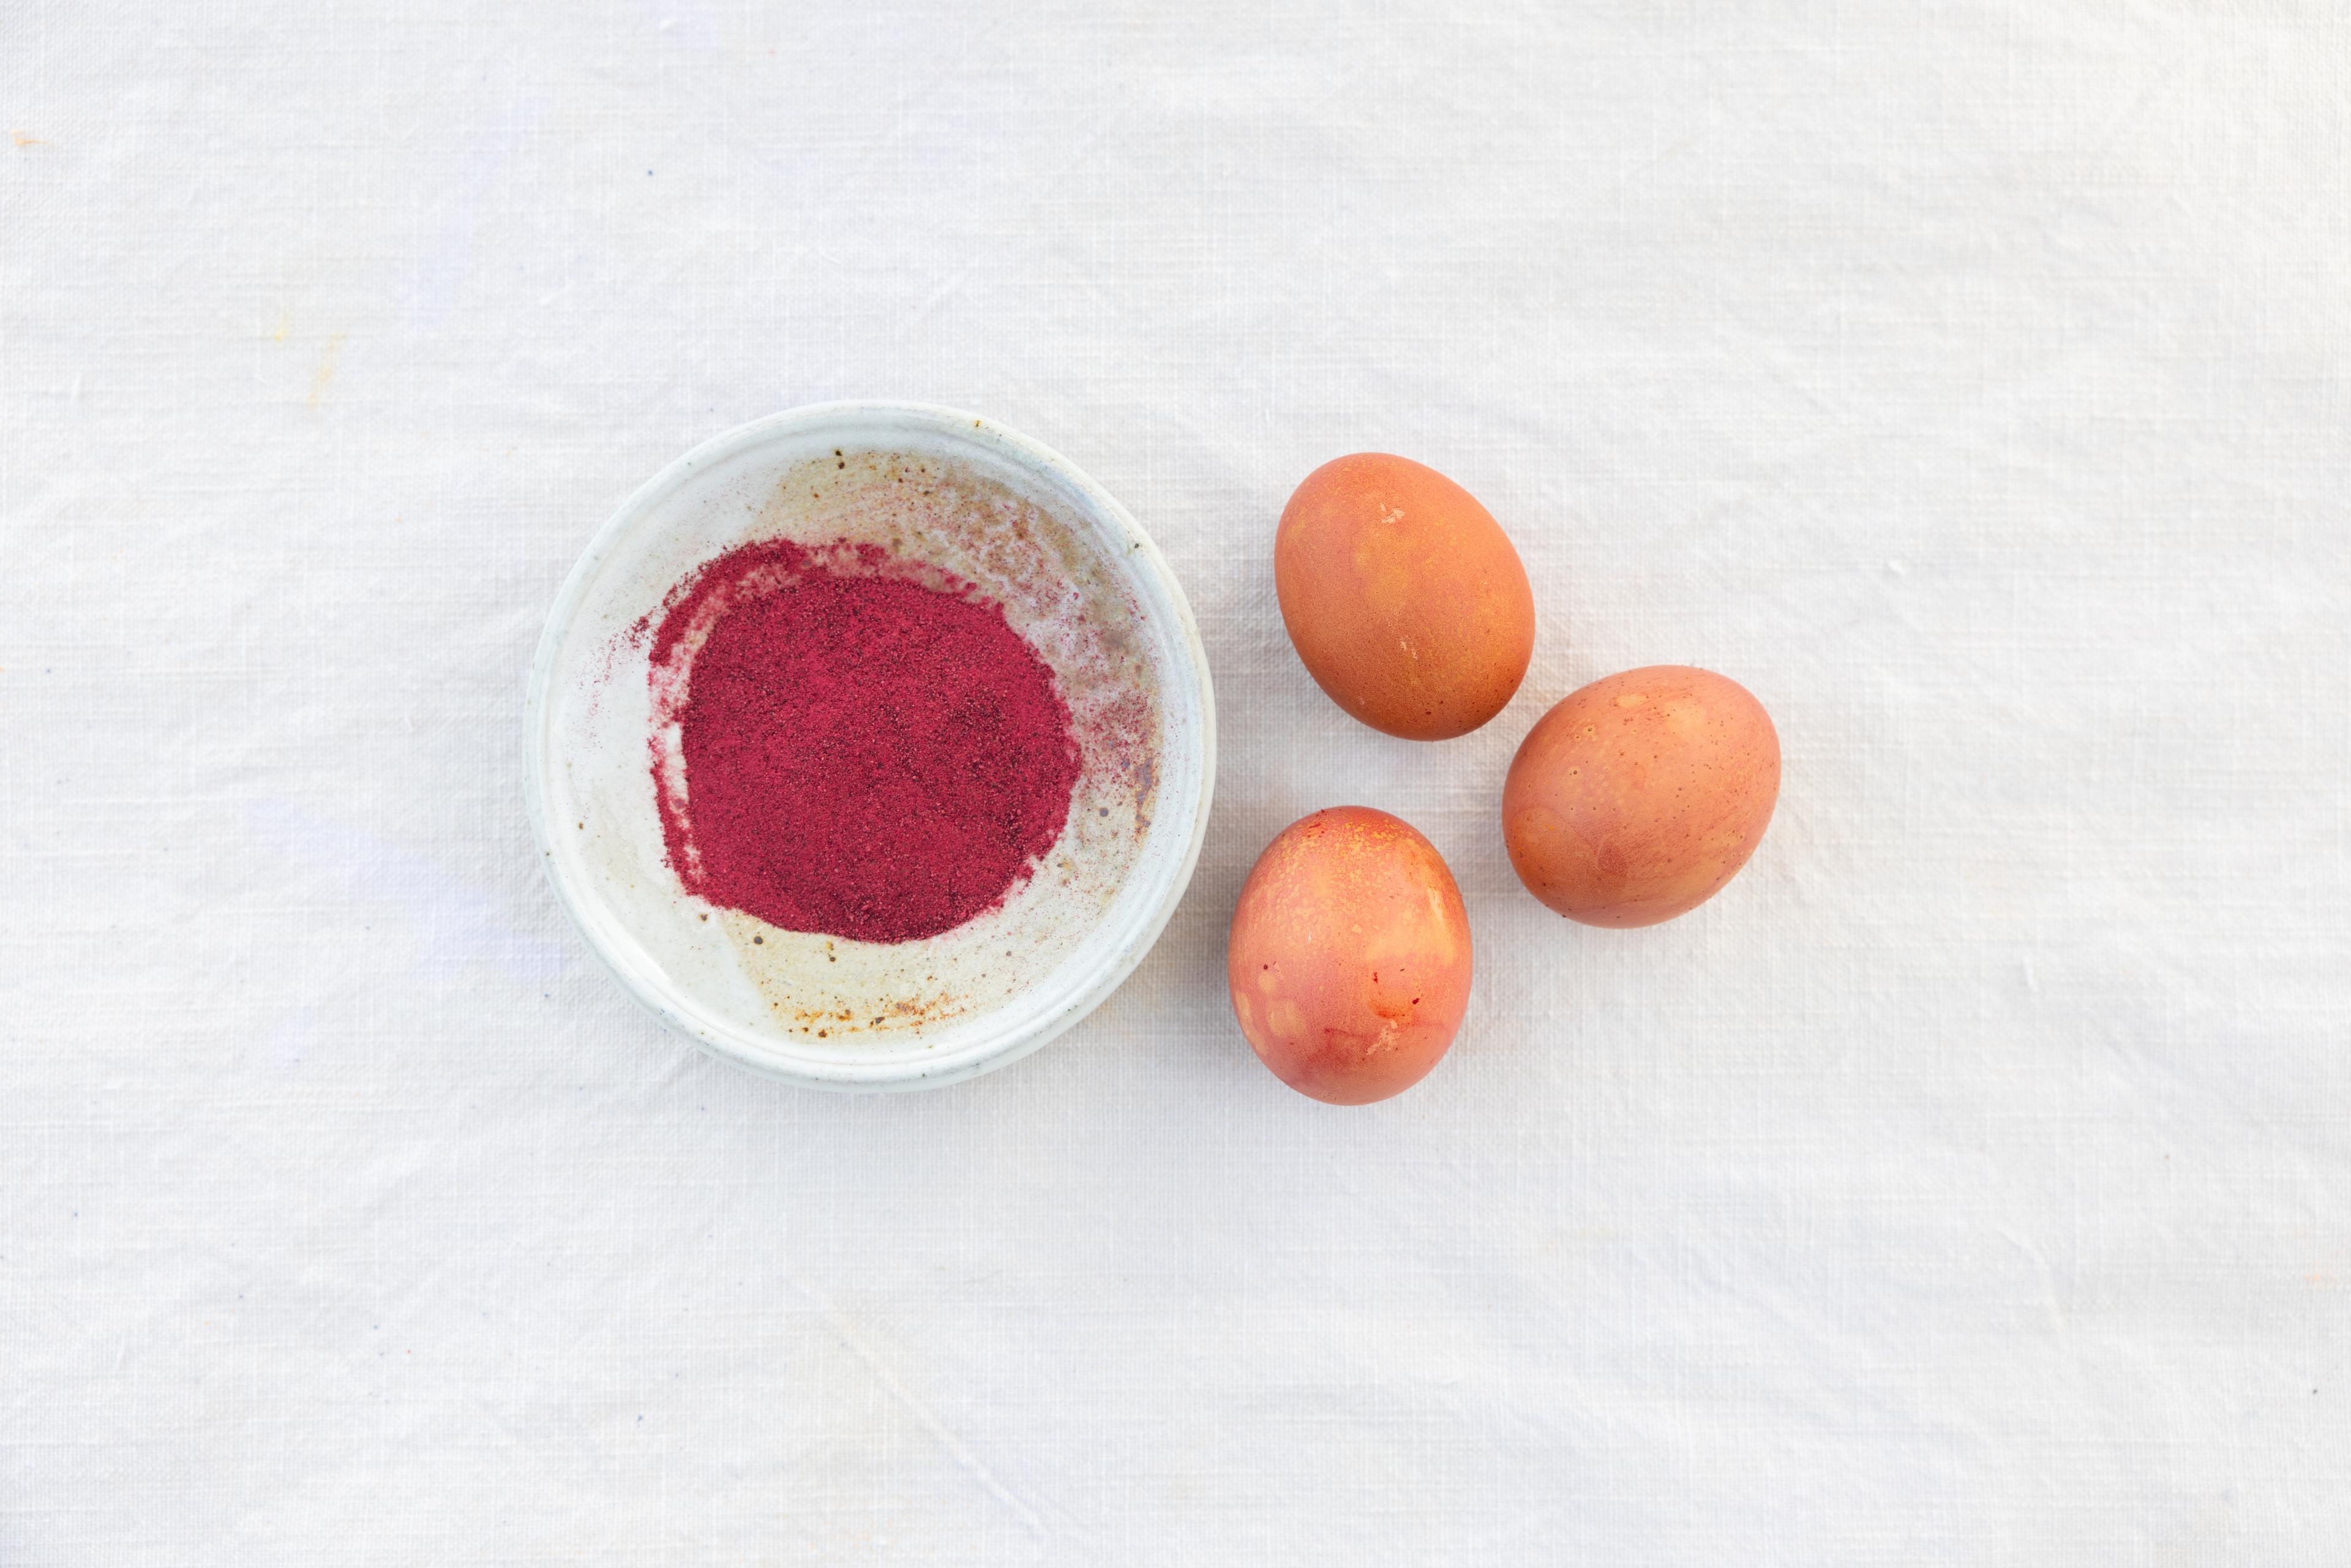 Beet root powder next to colored hard-boiled eggs.